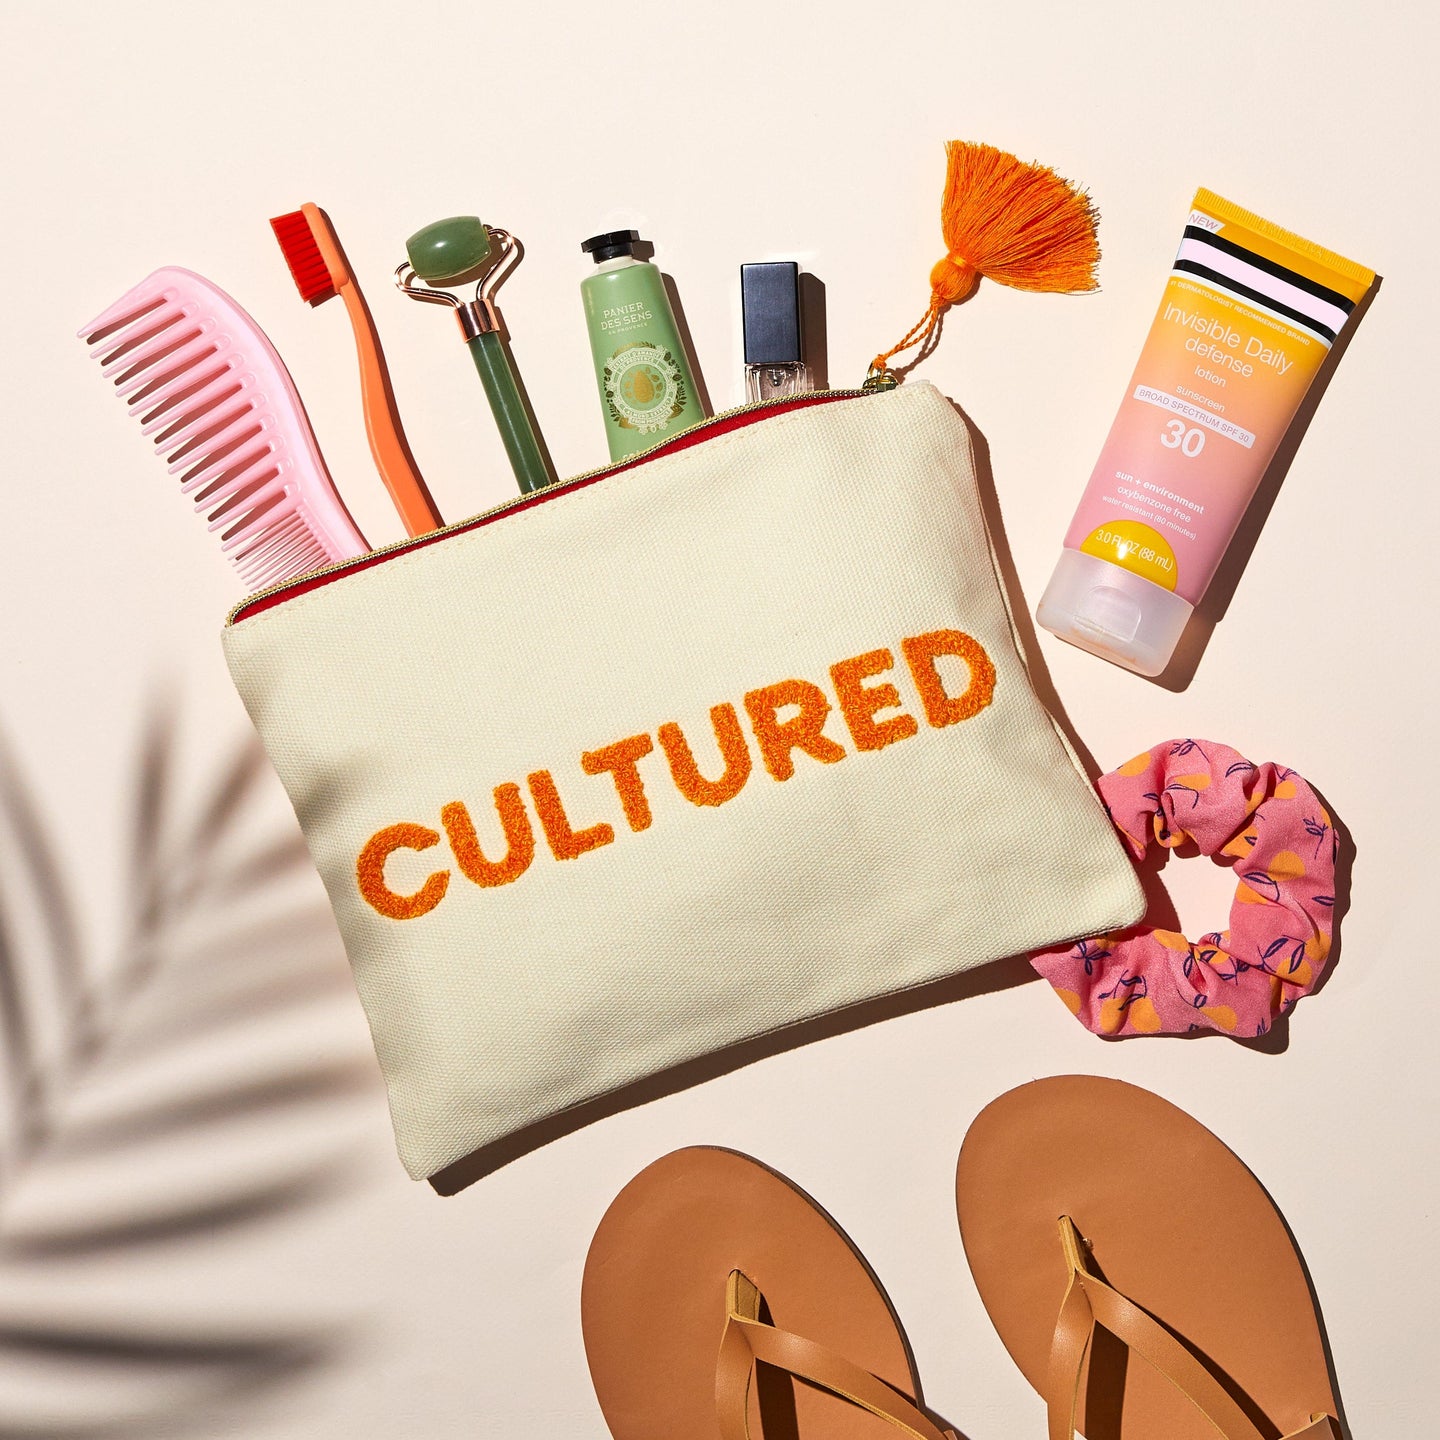 Cultured Canvas Travel + Accessory Pouch